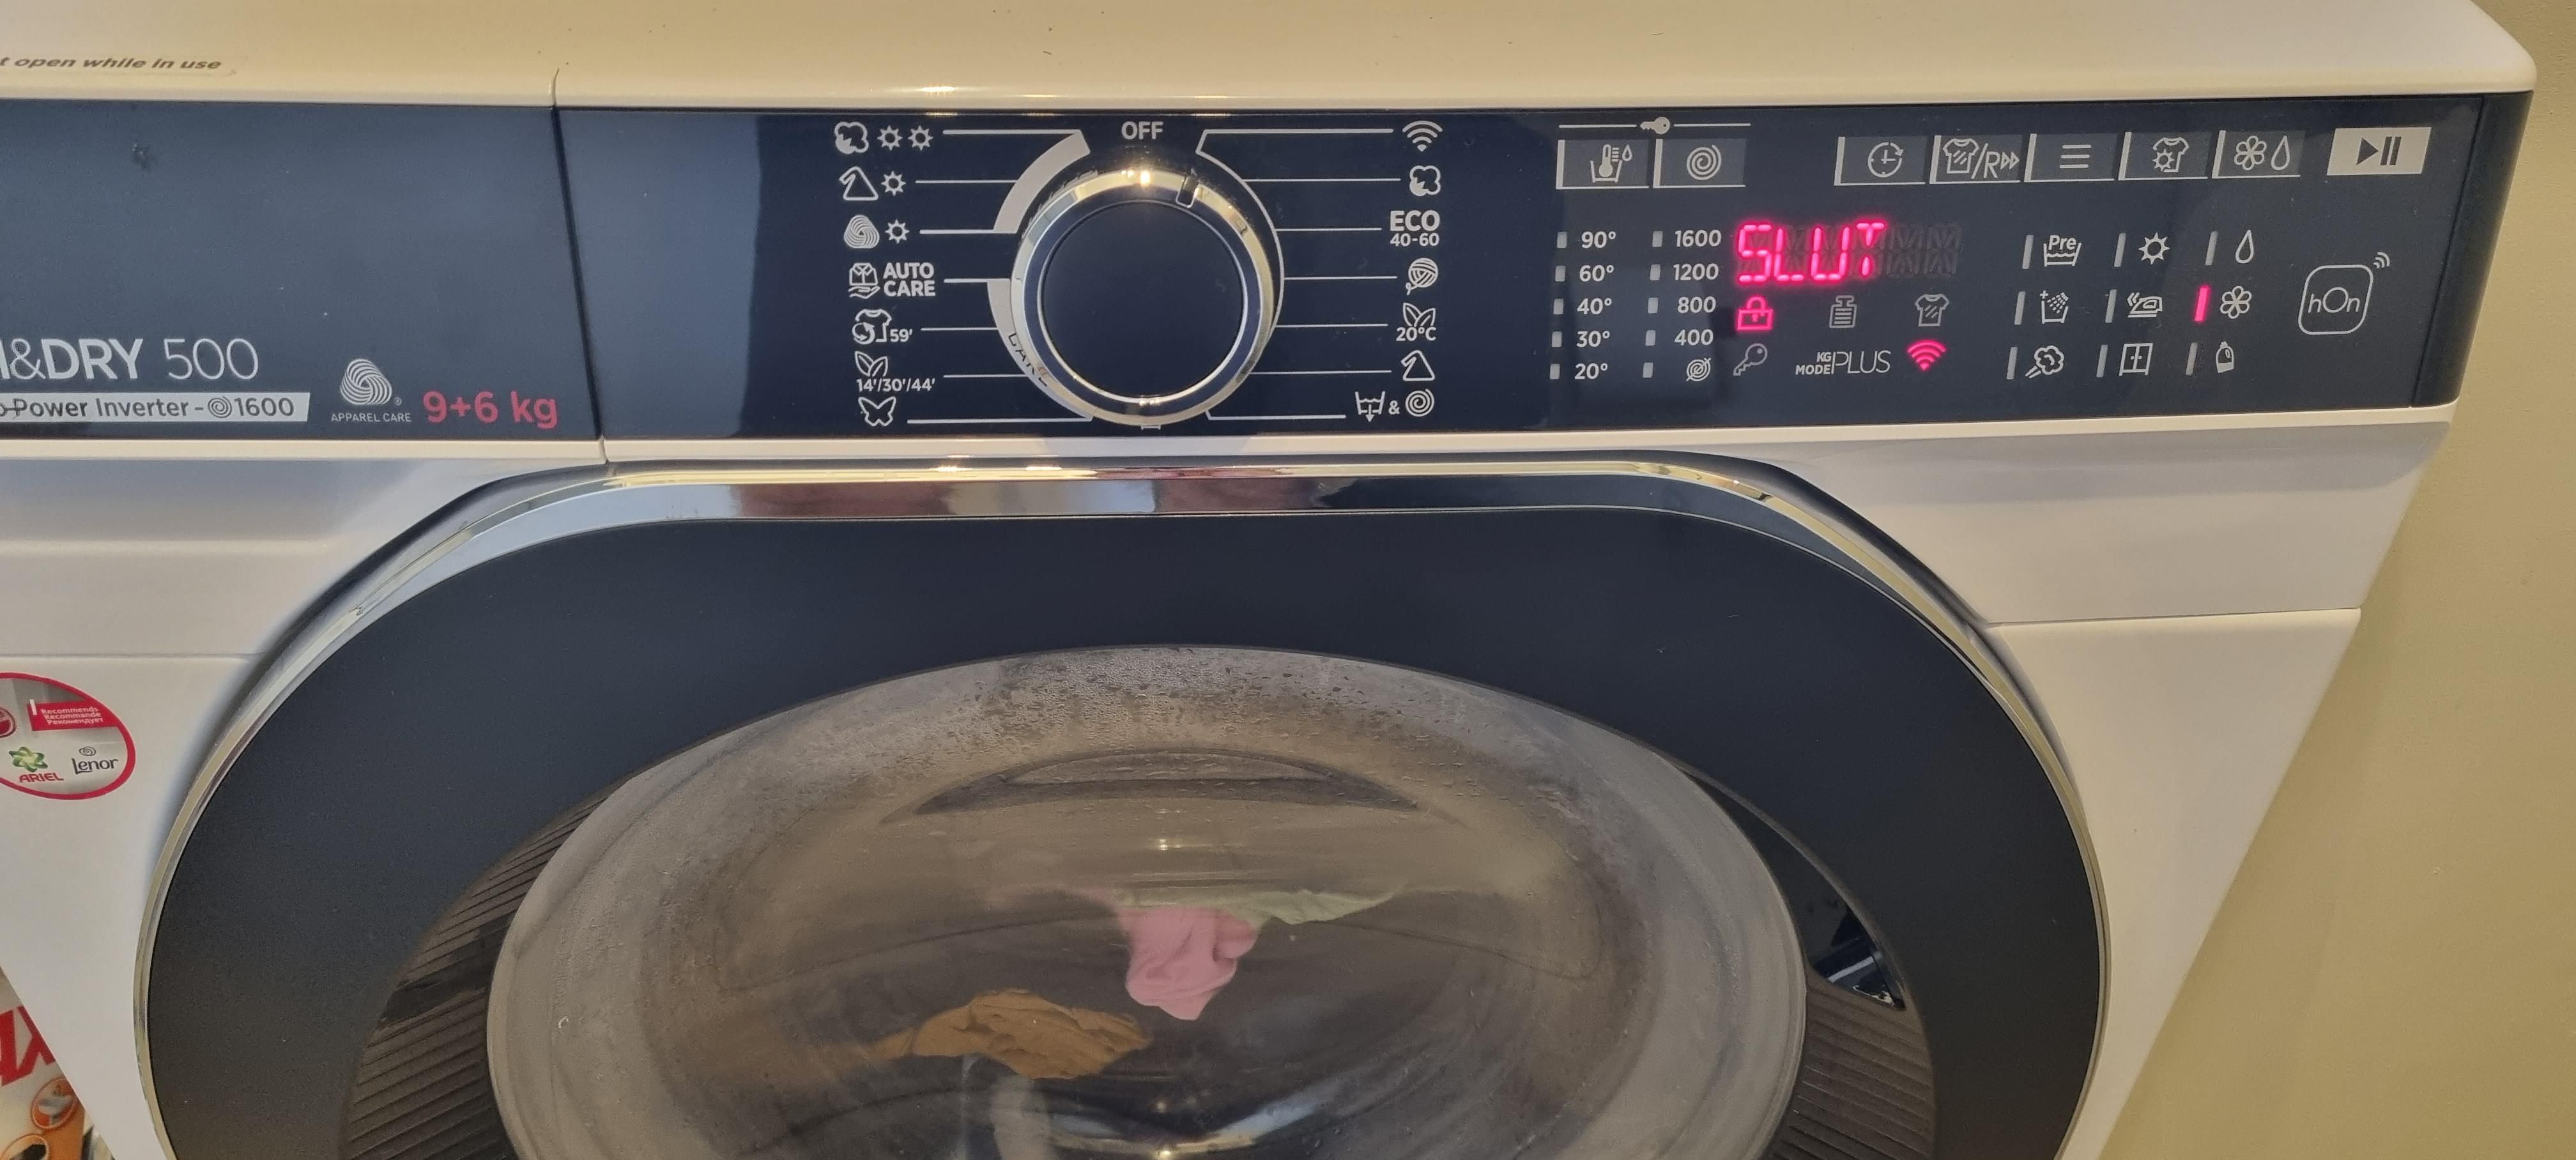 My new washing machine is shaming me after seeing my clothes